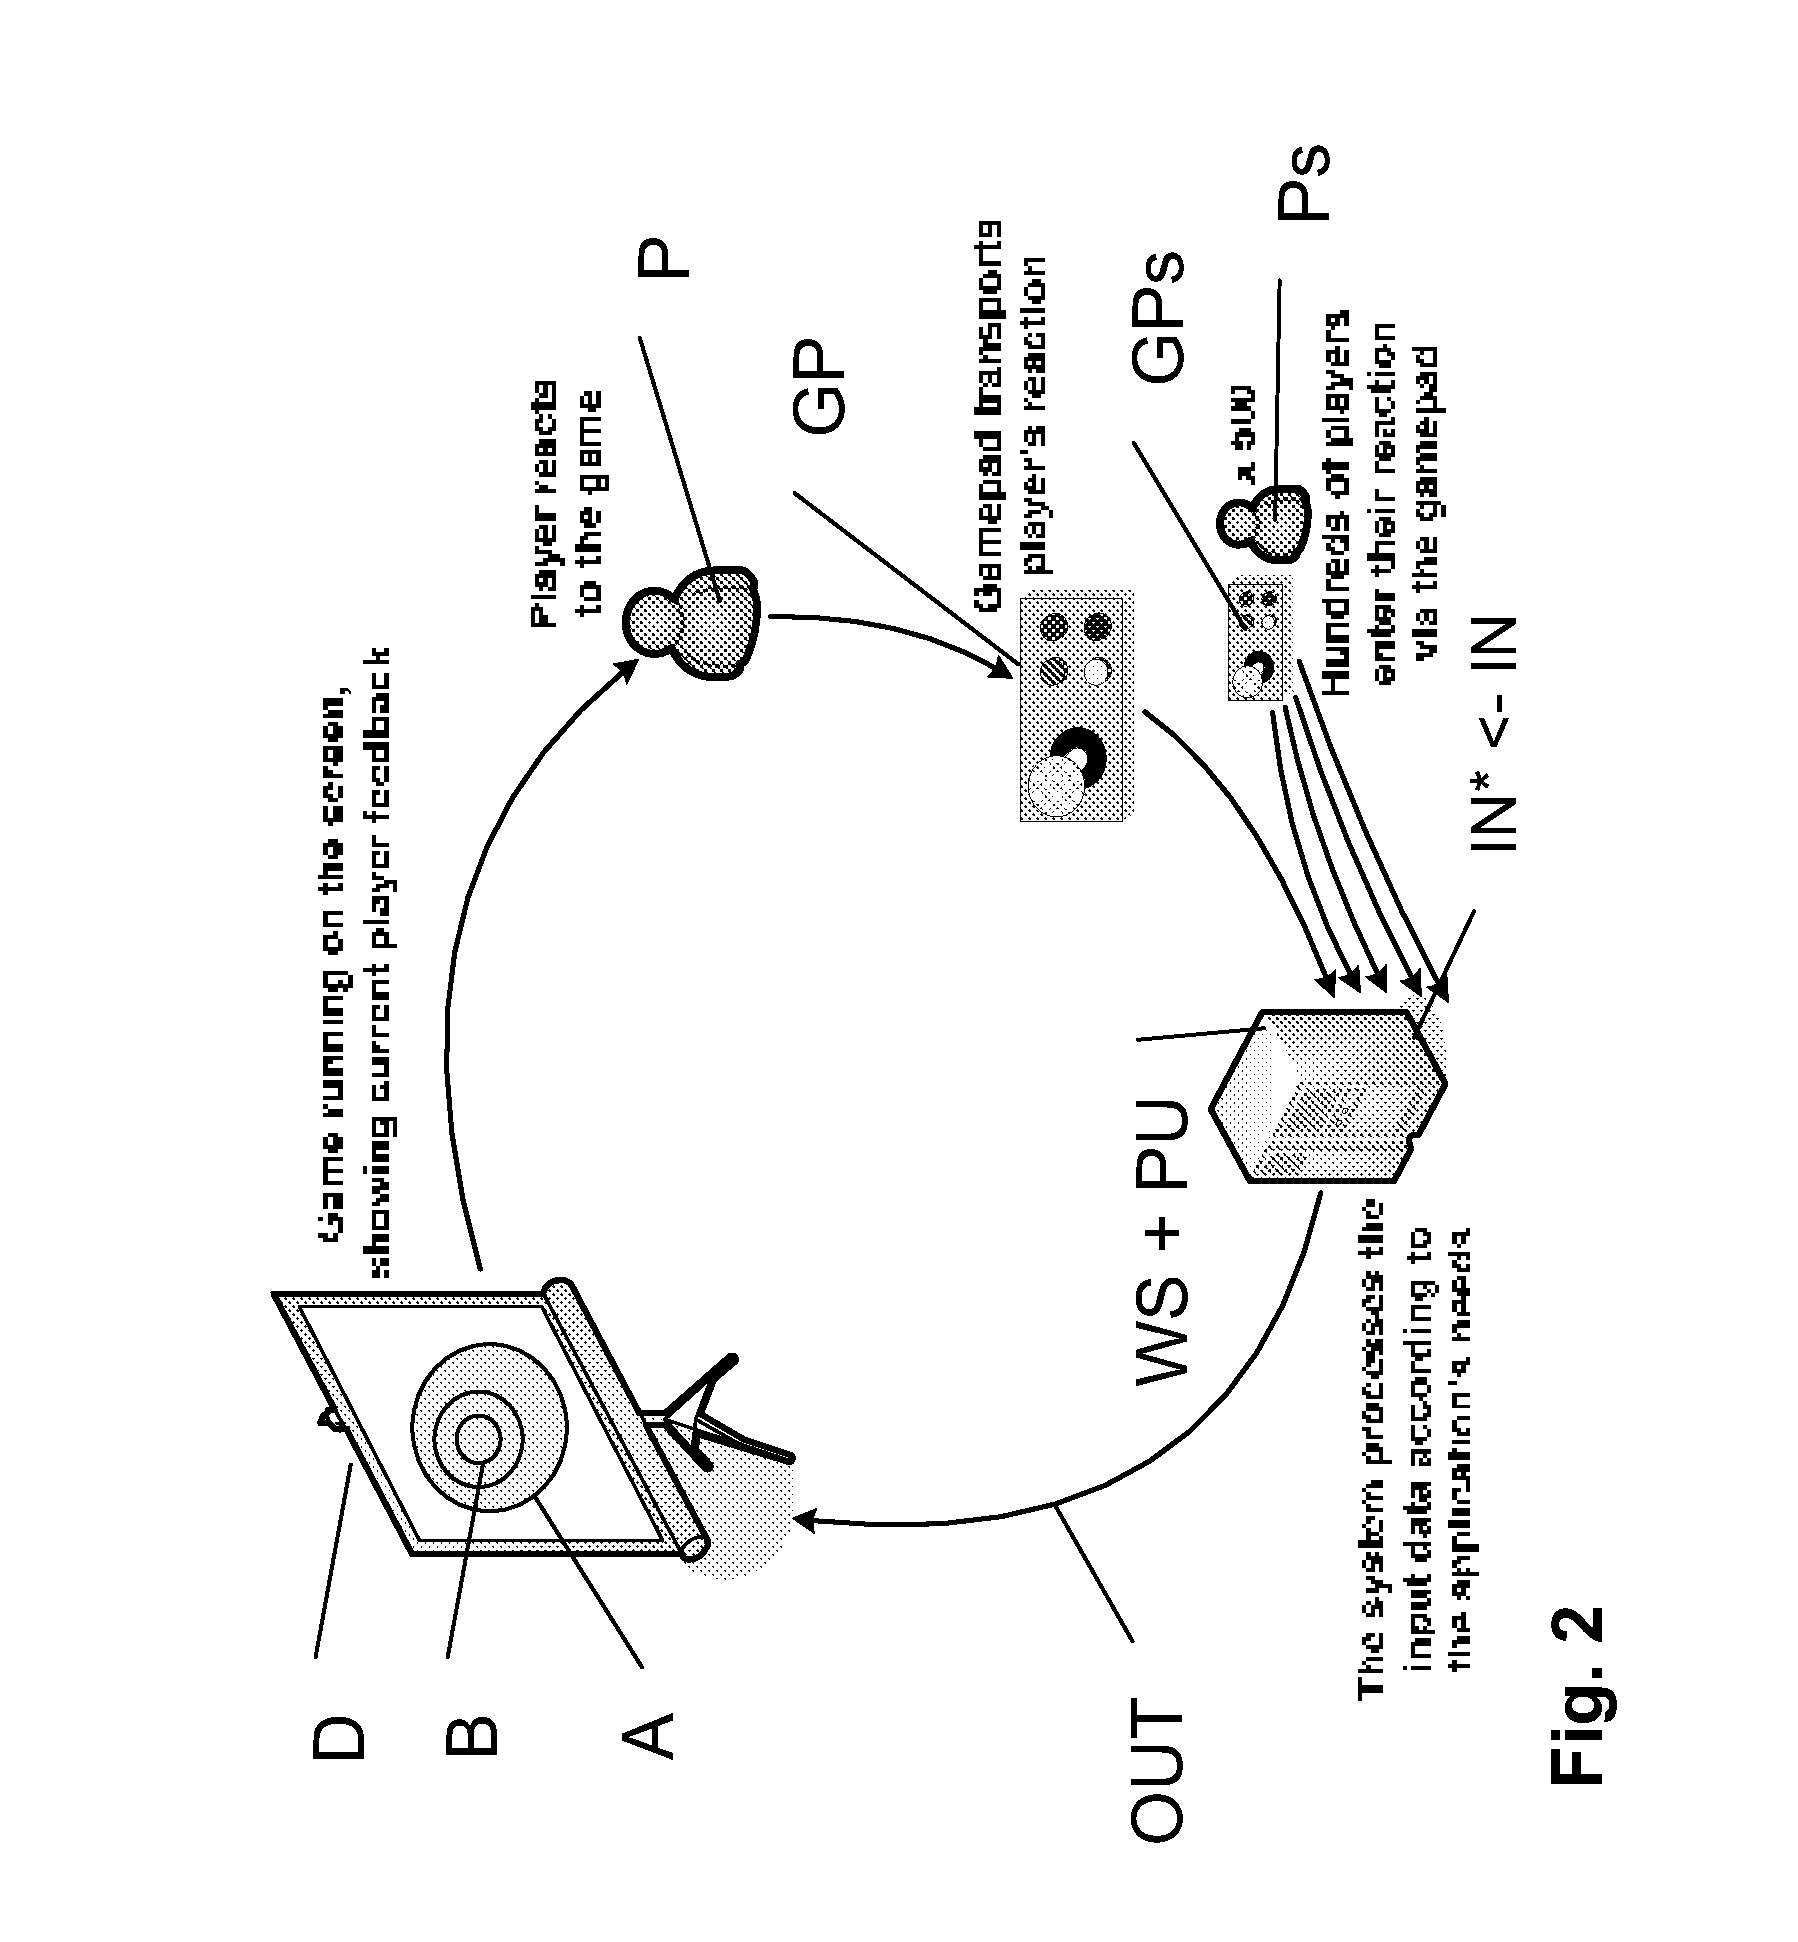 Multi-user computer-controlled video gaming system and a method of controlling at least one game mechanic